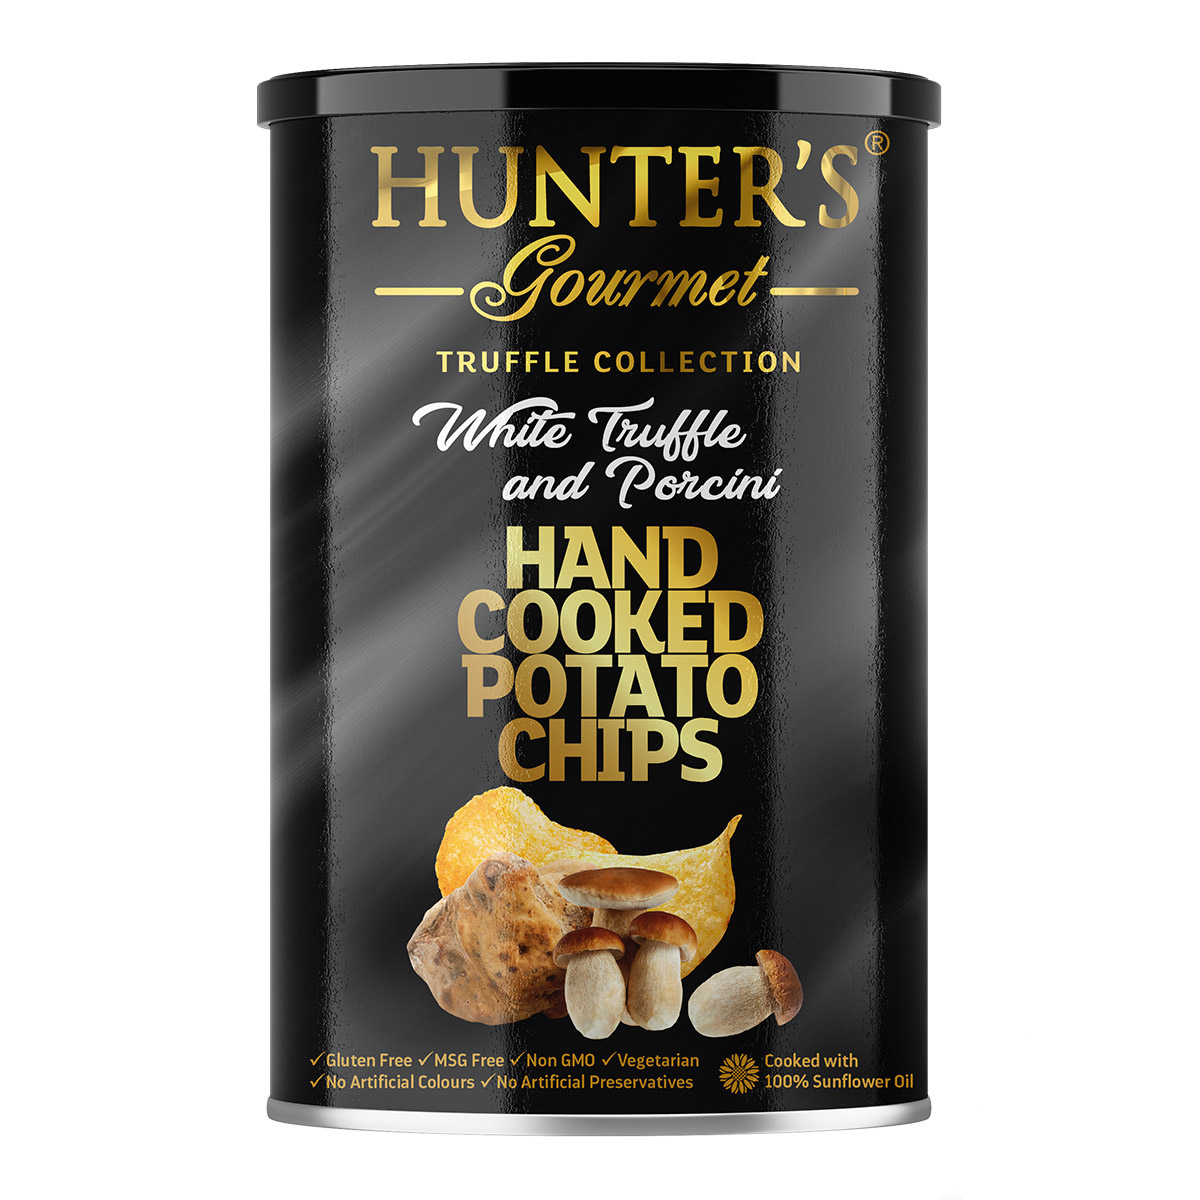 Hunter’s Gourmet Hand Cooked Potato Chips – White Truffle – Truffle Collection (150gm)